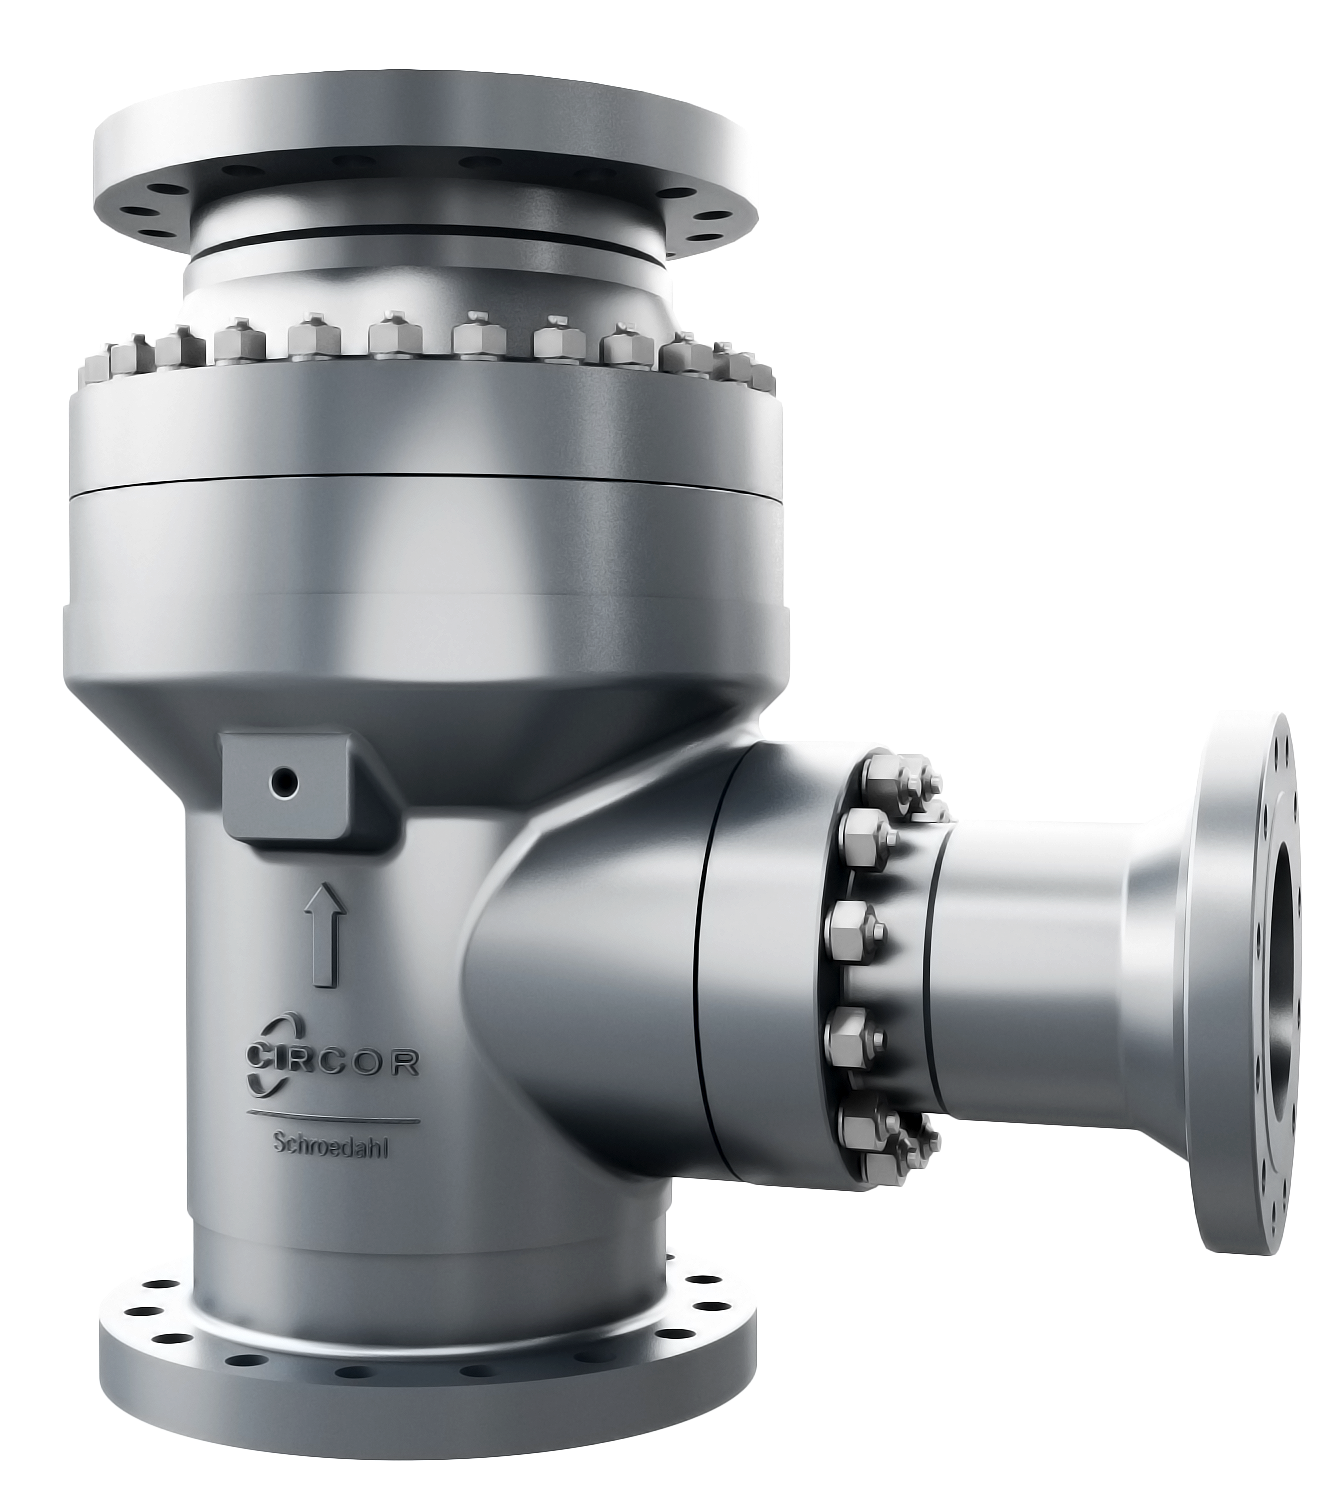 Schroedahl TDL Automatic Recirculation Valves operate without a separate power supply or any control system.